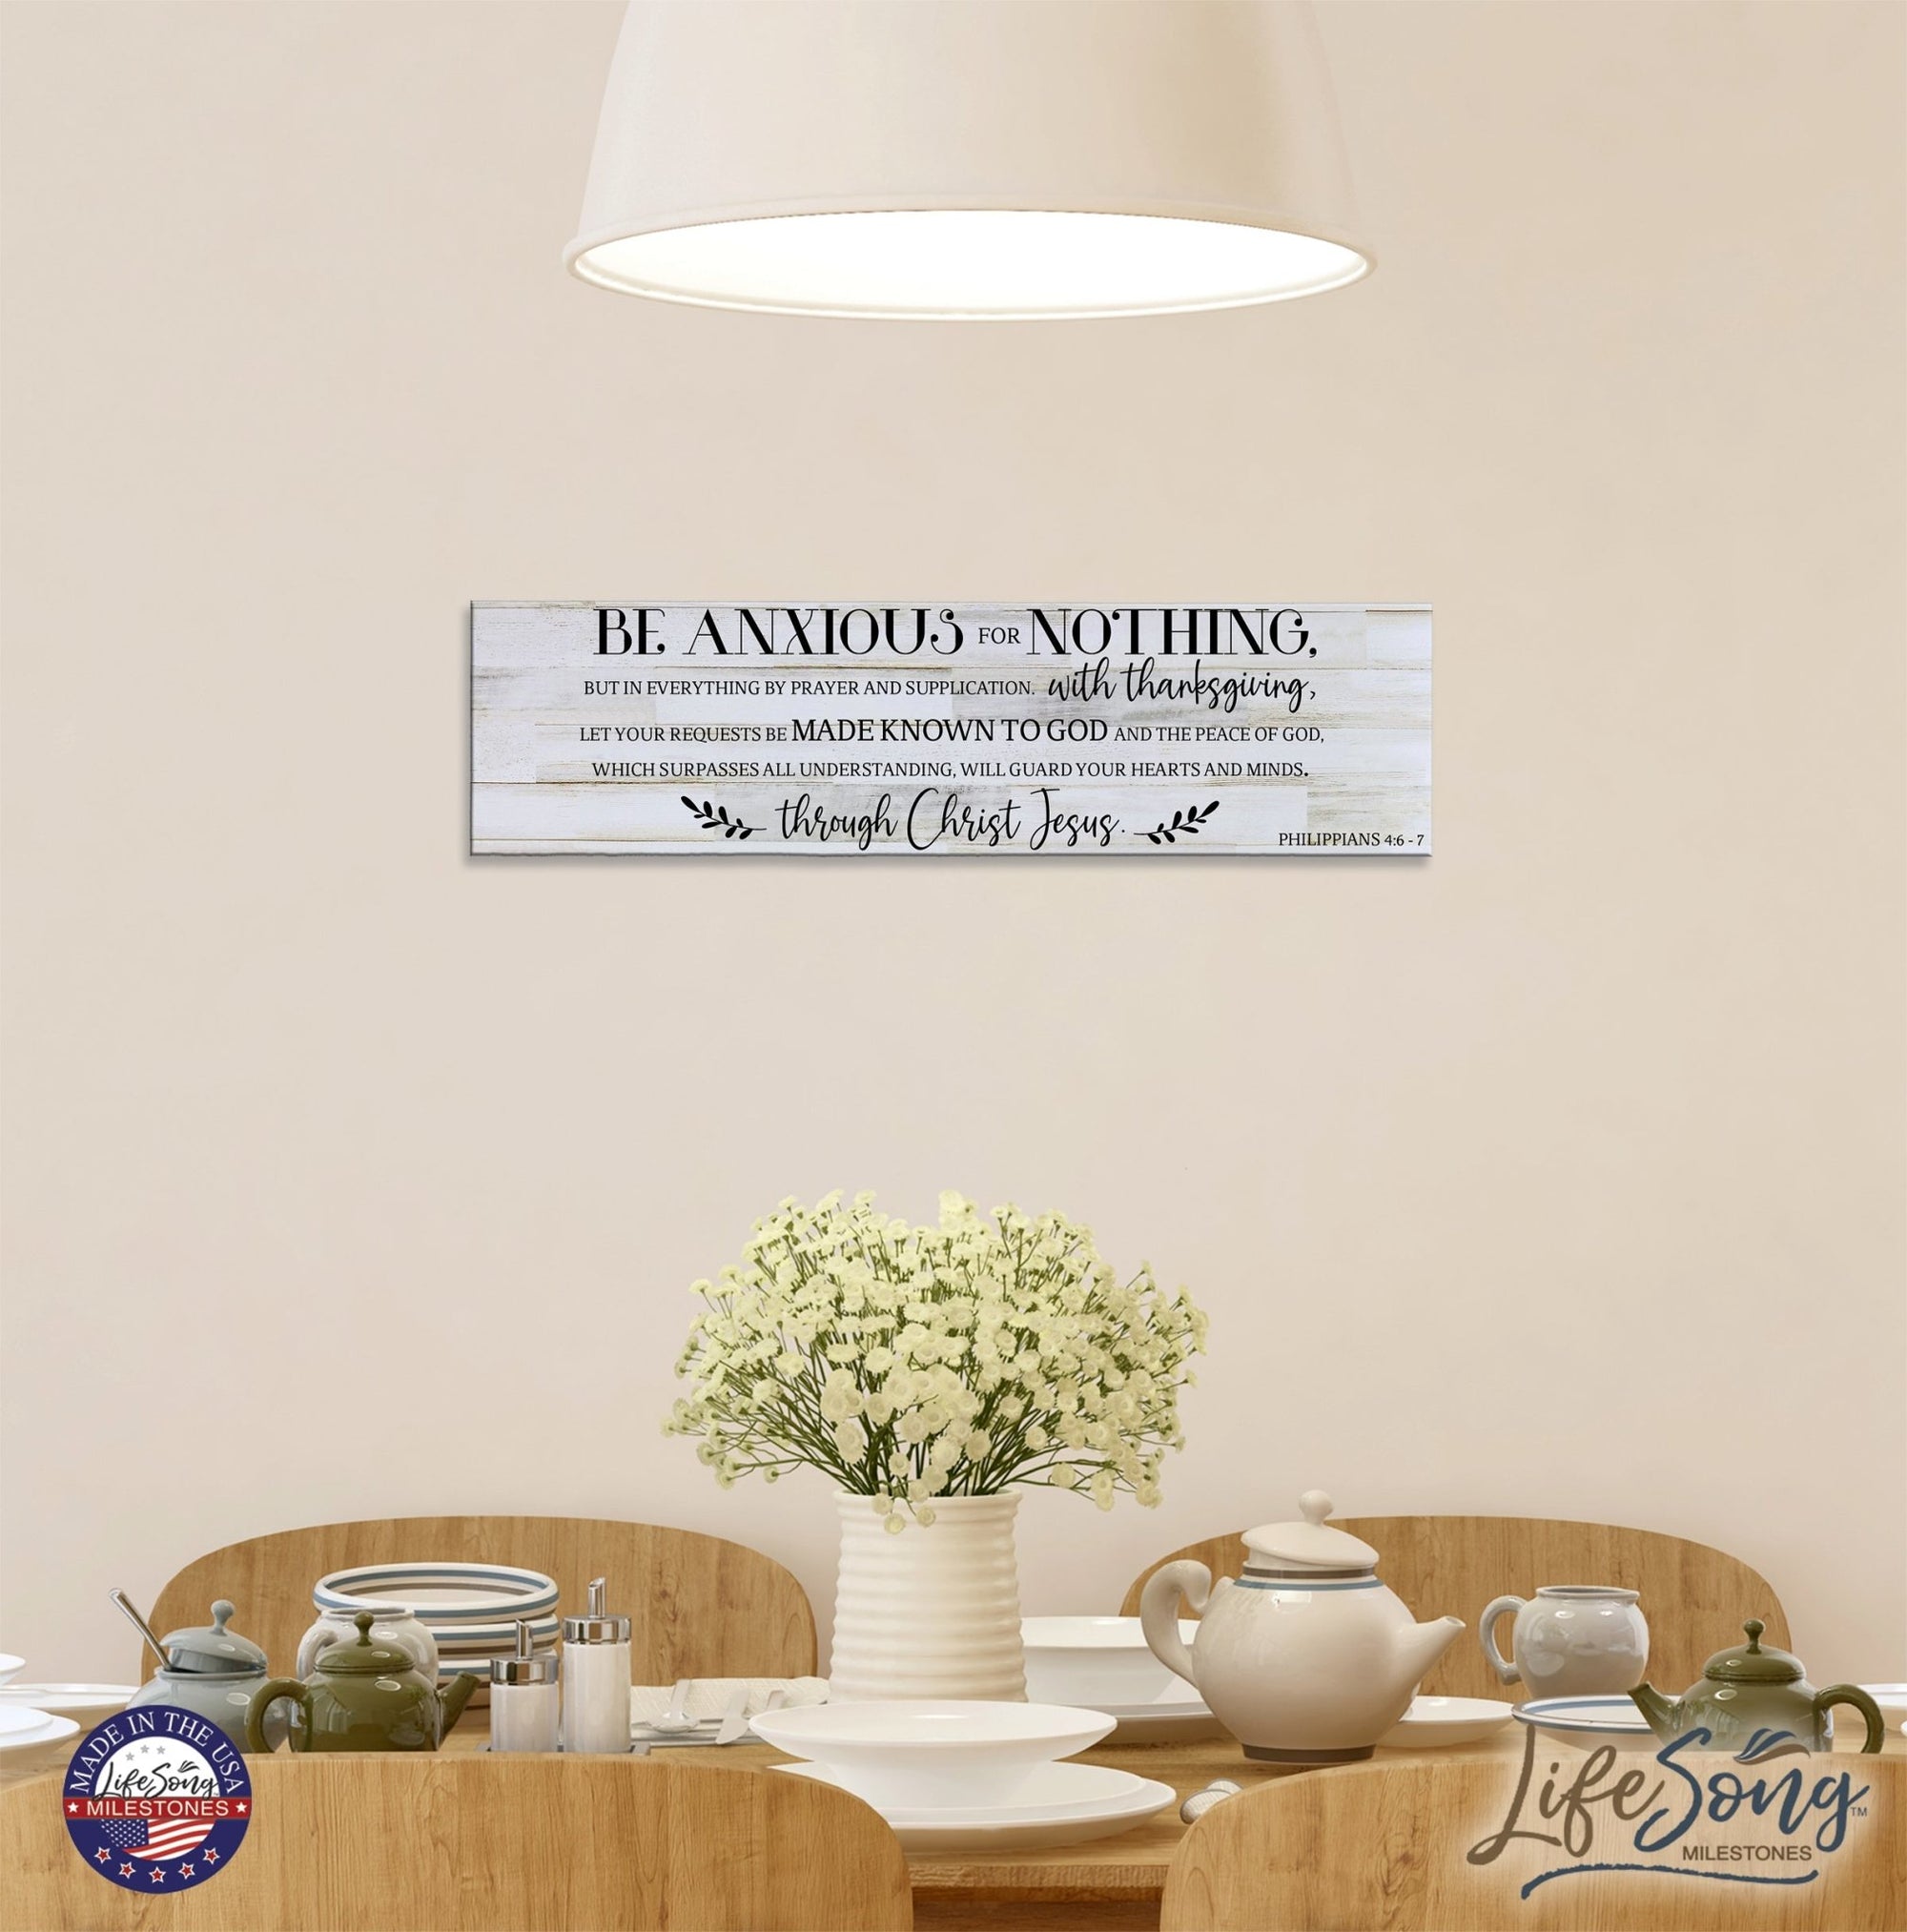 Inspirational Modern Wooden Wall Hanging Plaque 10x40 - Be Anxious For Nothing - LifeSong Milestones